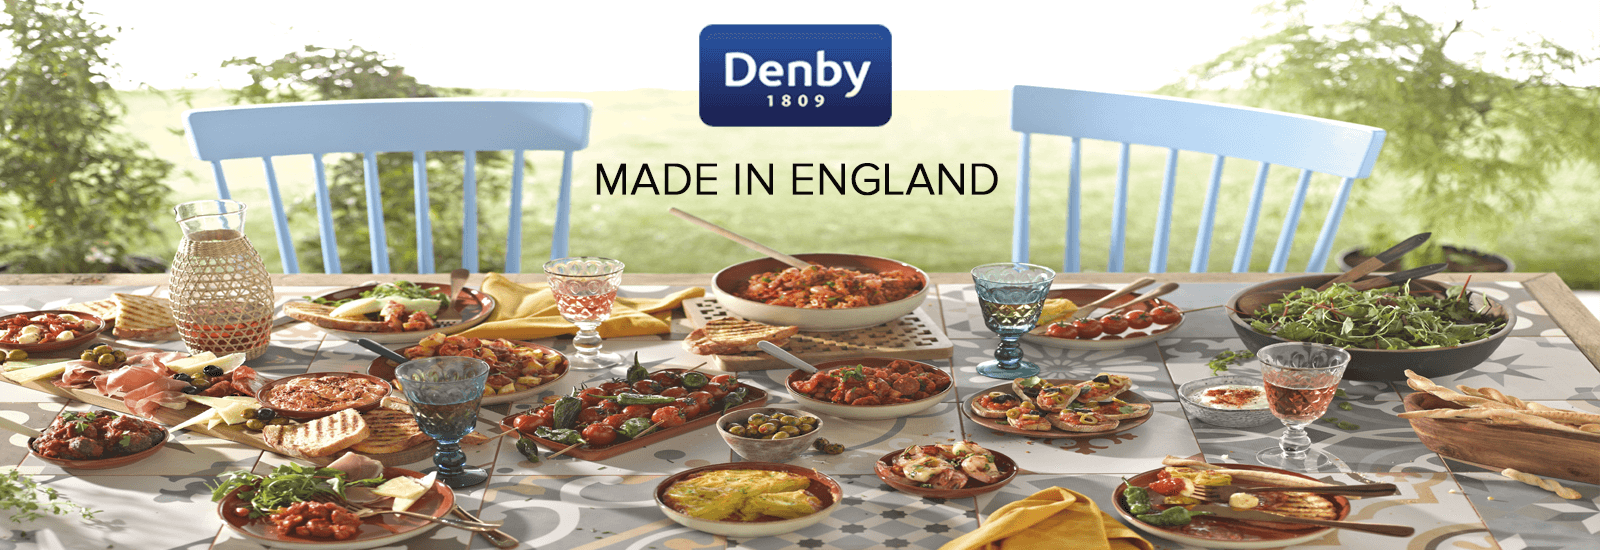 denby MAde in England